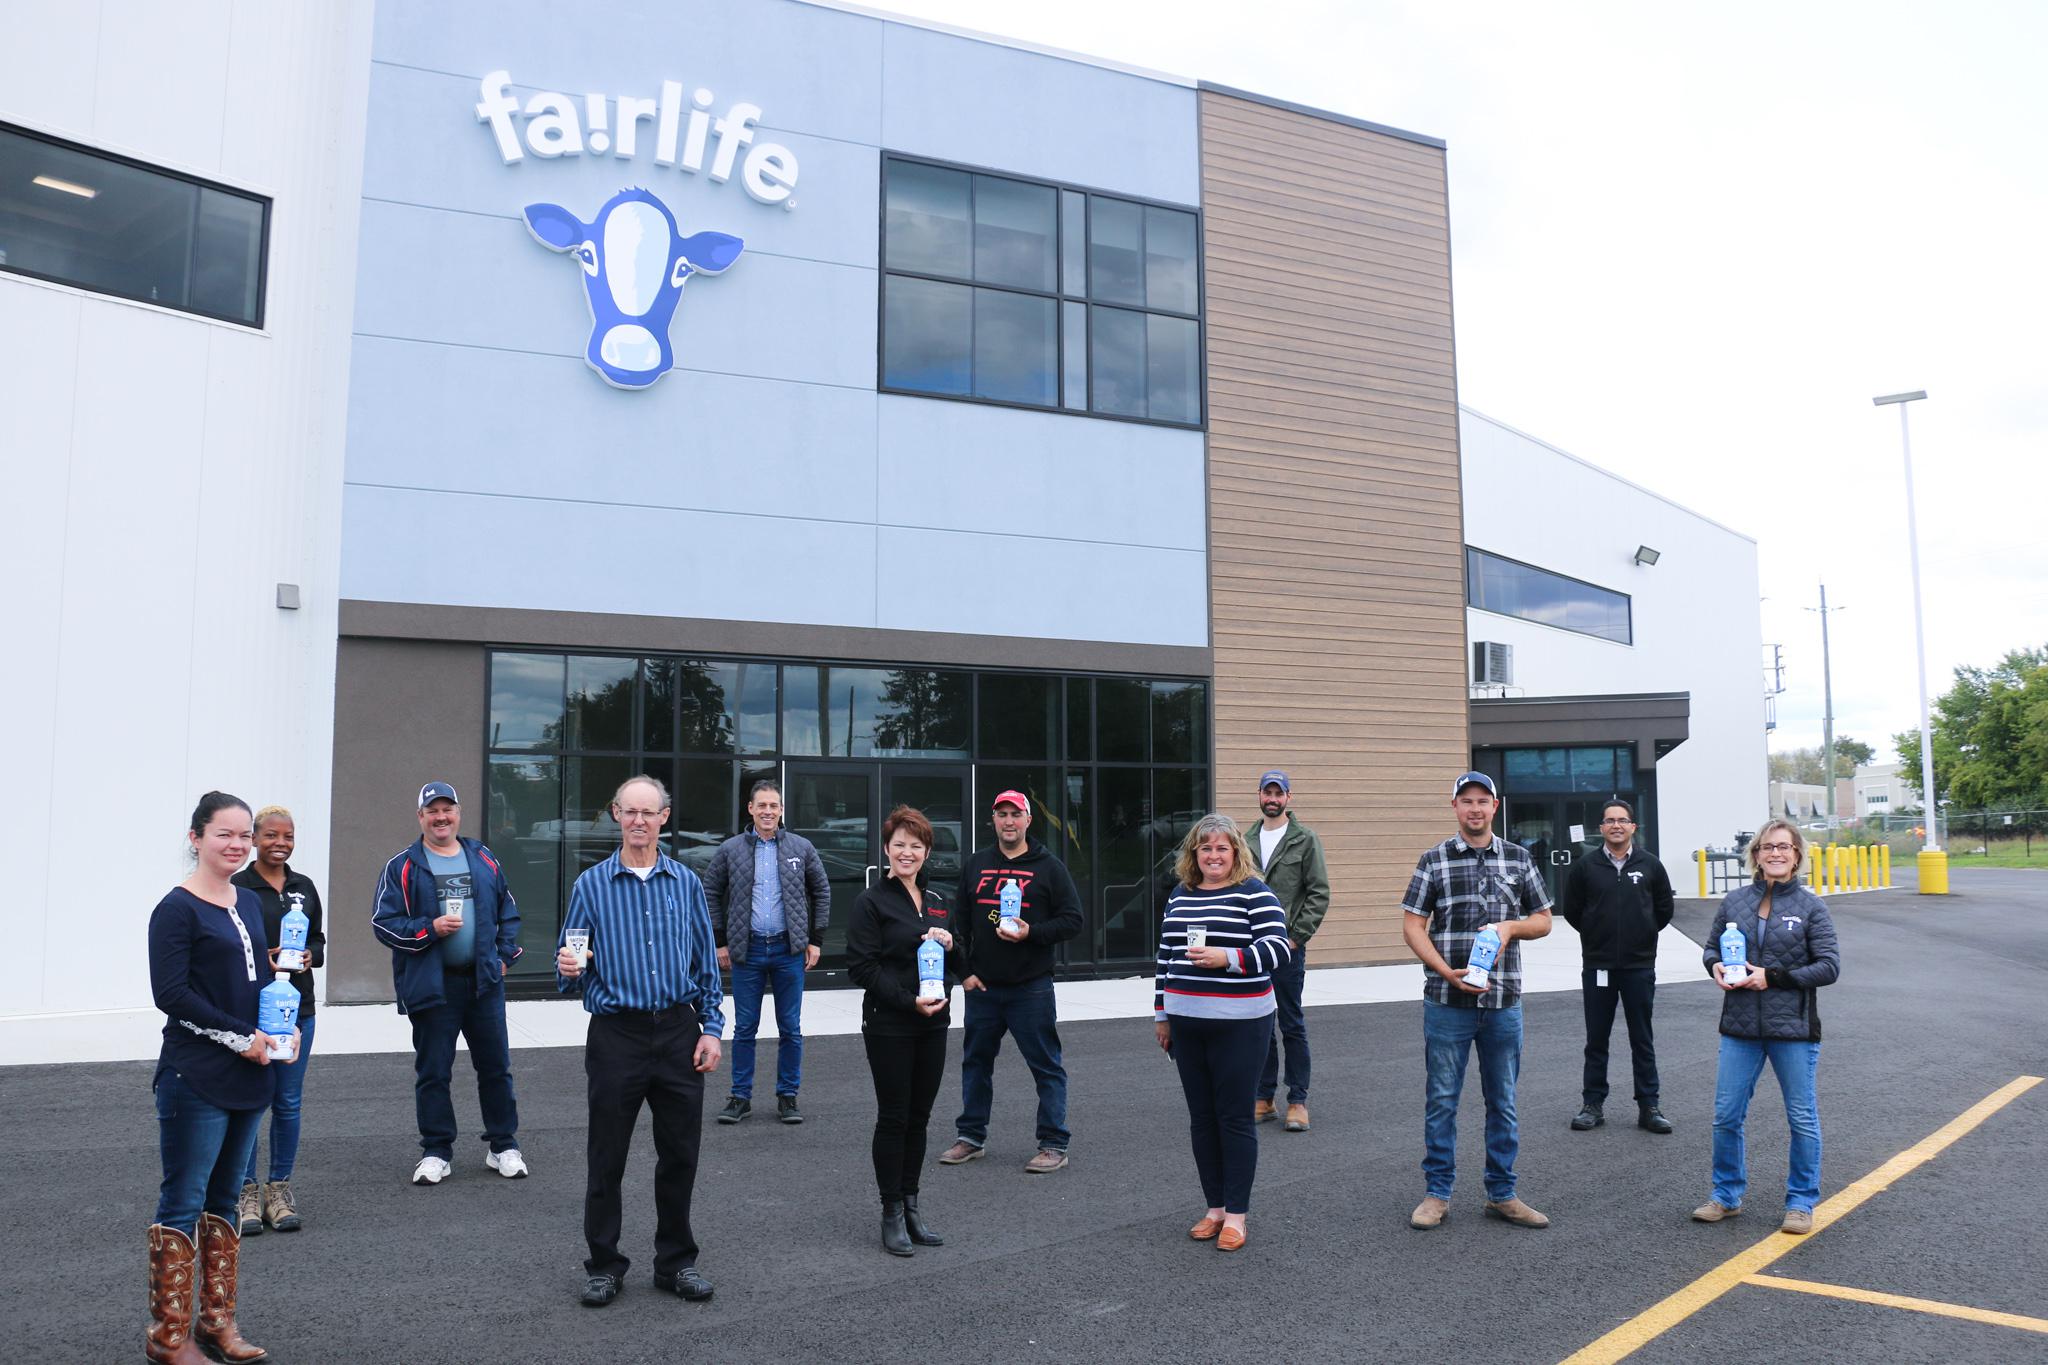 A group of local farmers standing in front of fairlife's new Canadian dairy facility in Peterborough, ON